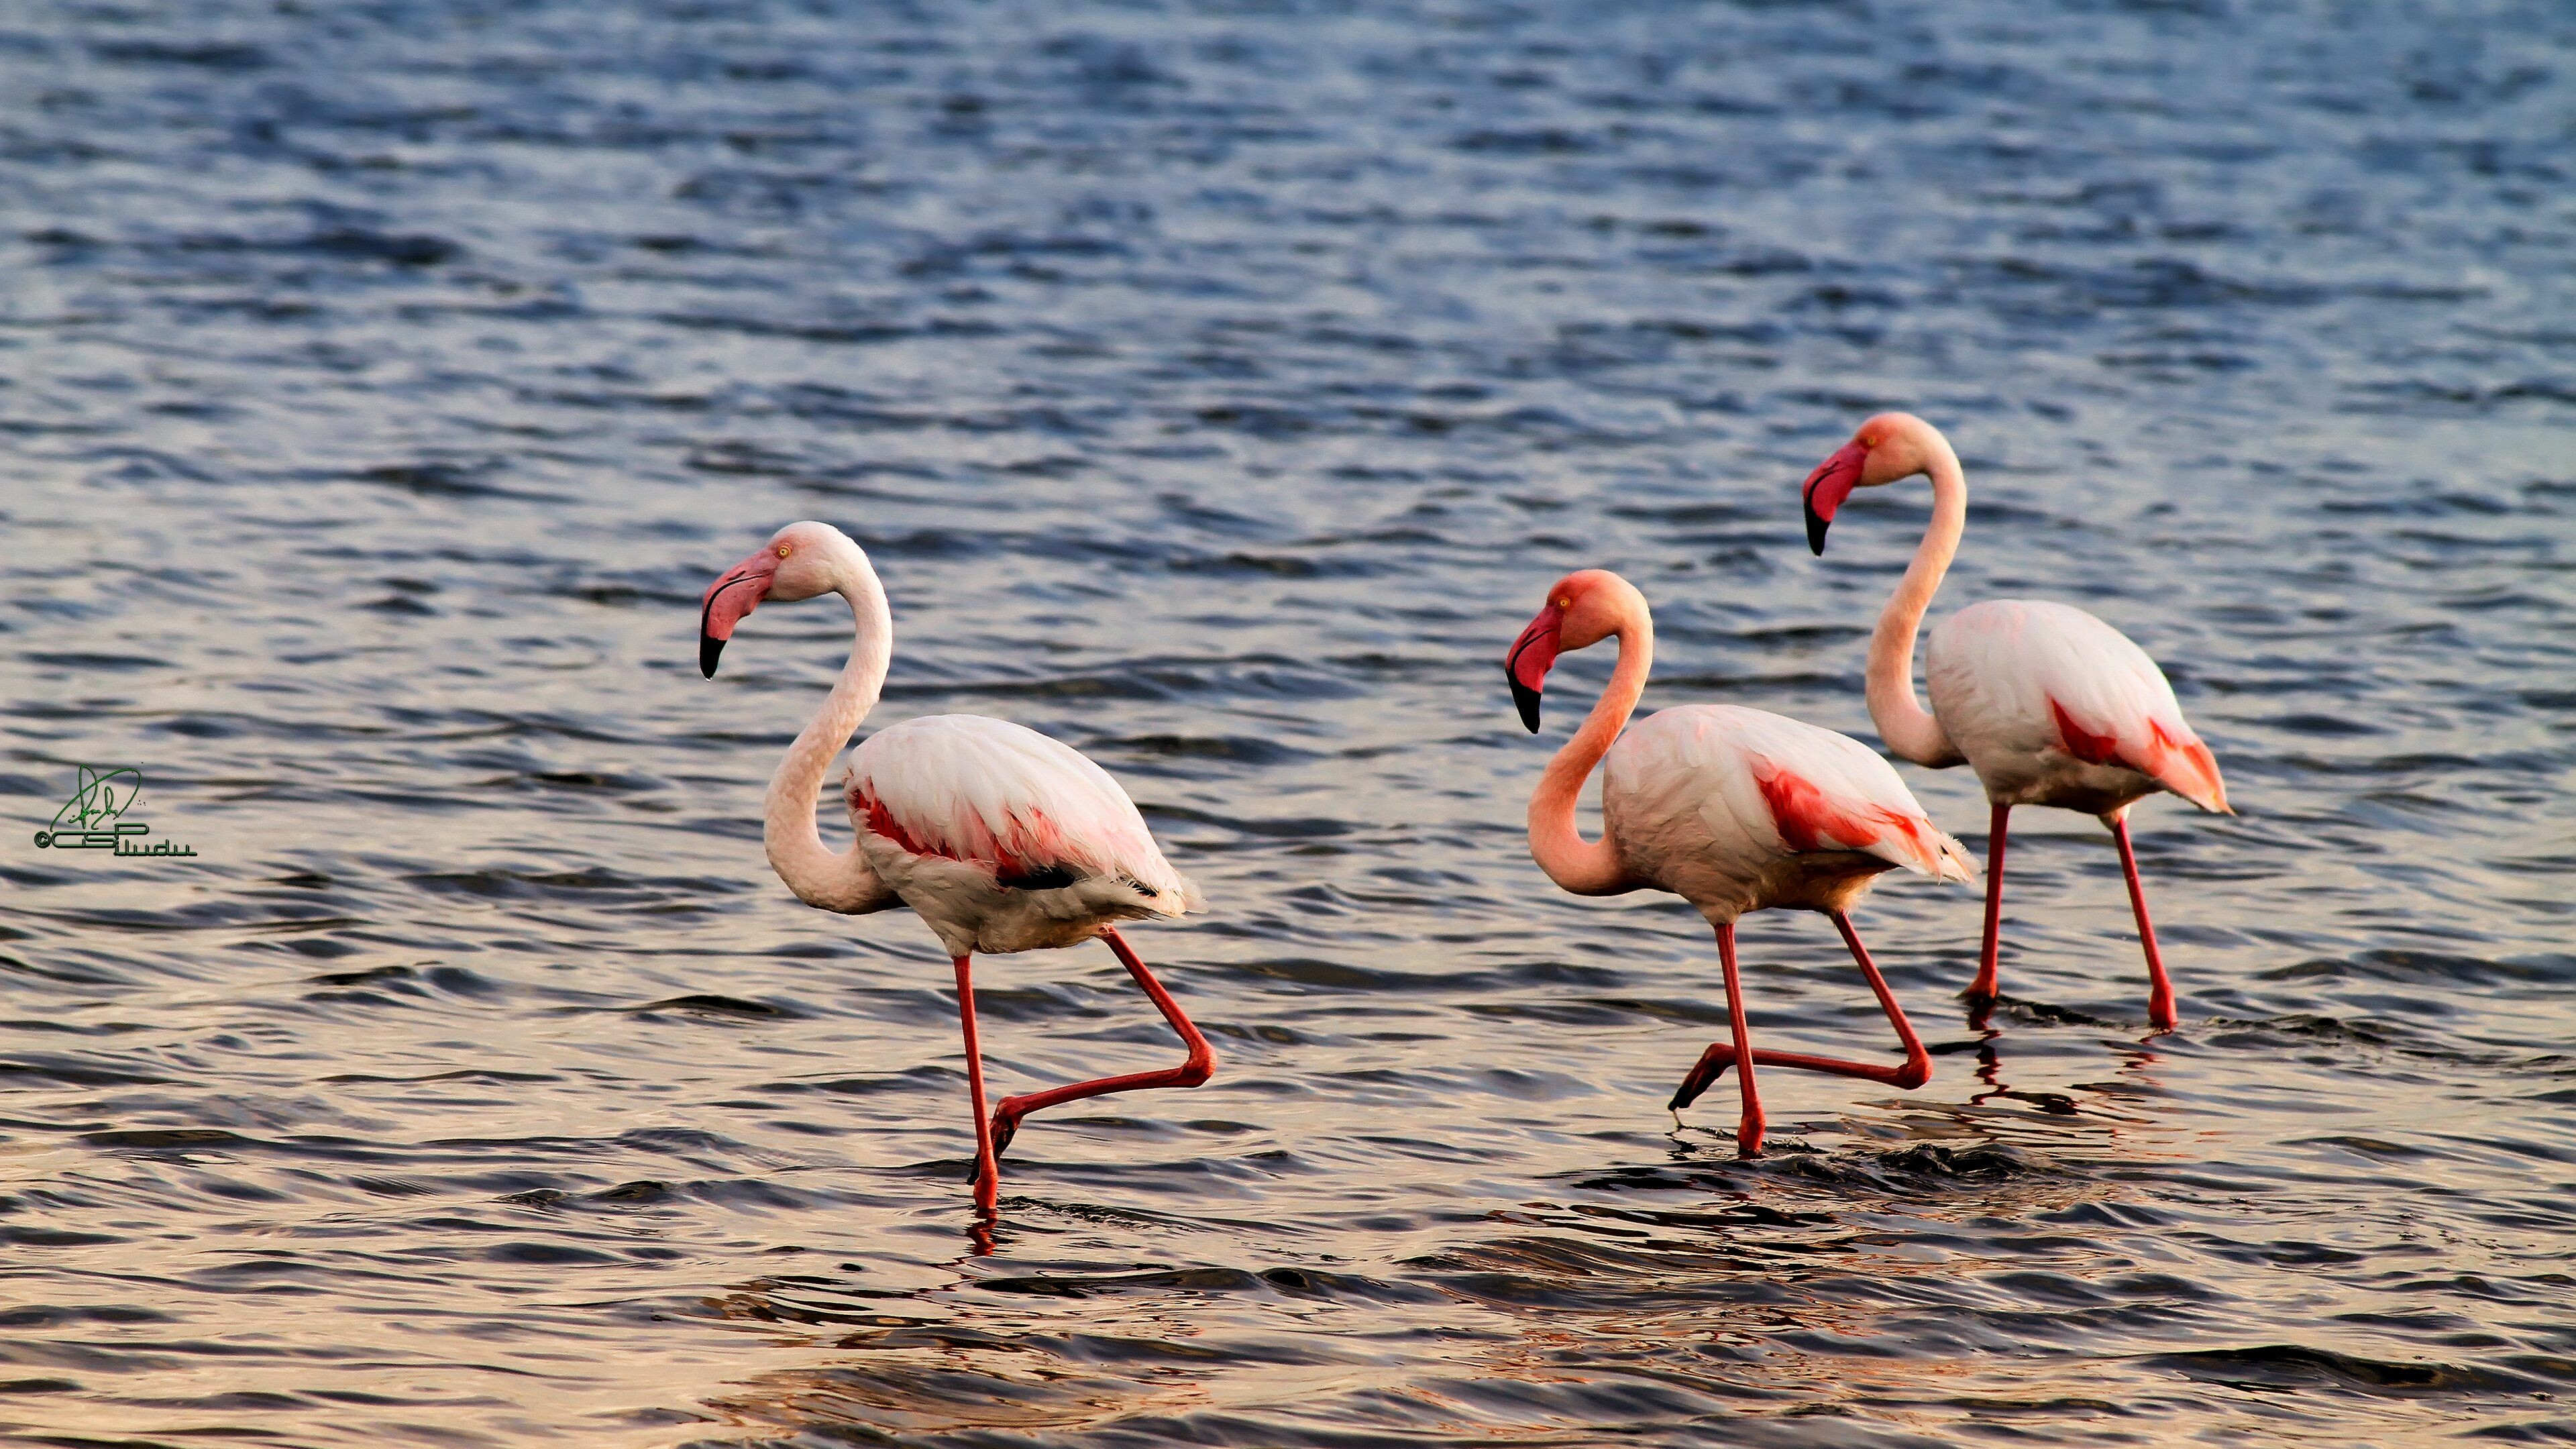 Flamingo: Large birds with long necks, sticklike legs and pink or reddish feathers. 3840x2160 4K Wallpaper.